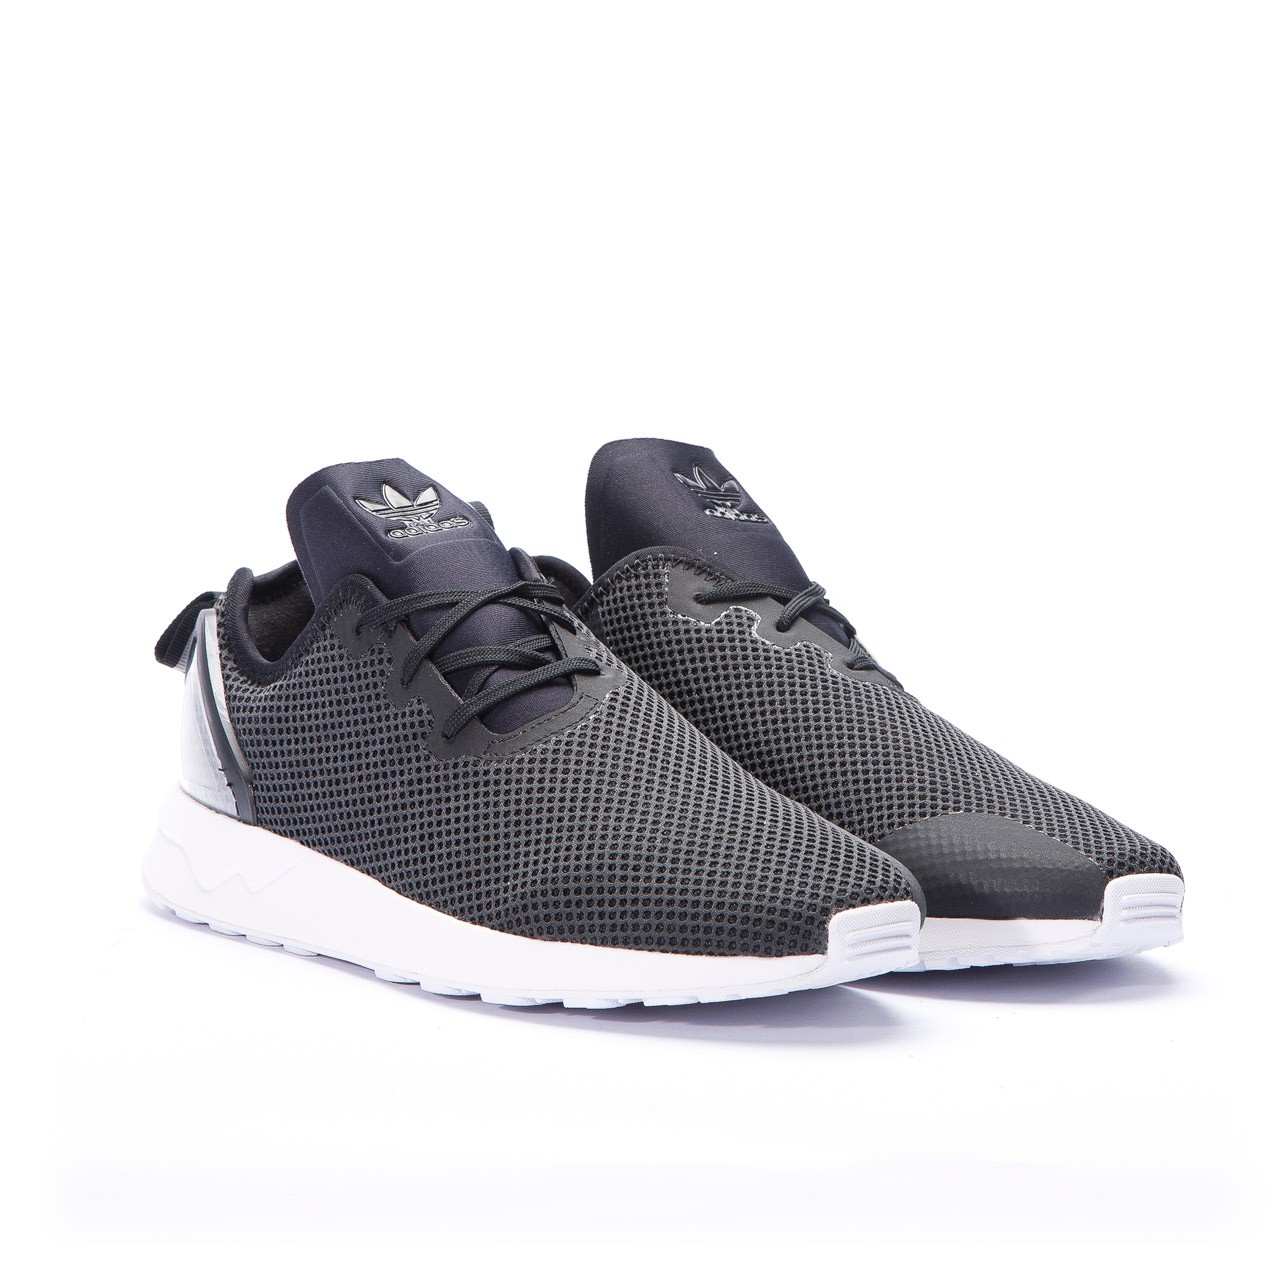 adidas zx flux adv France homme